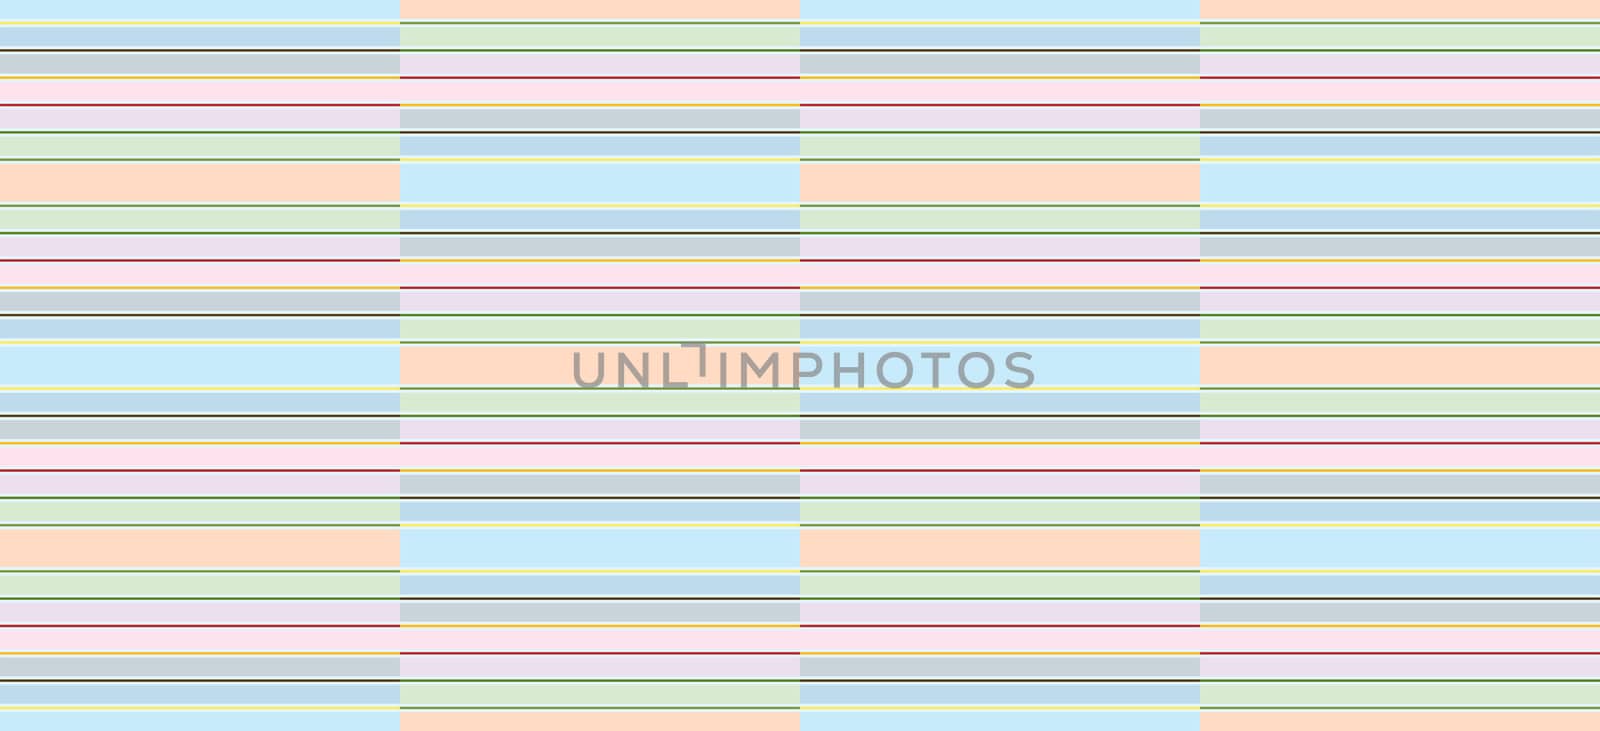 Seamless wallpaper pattern of various colored bars in lines and columns